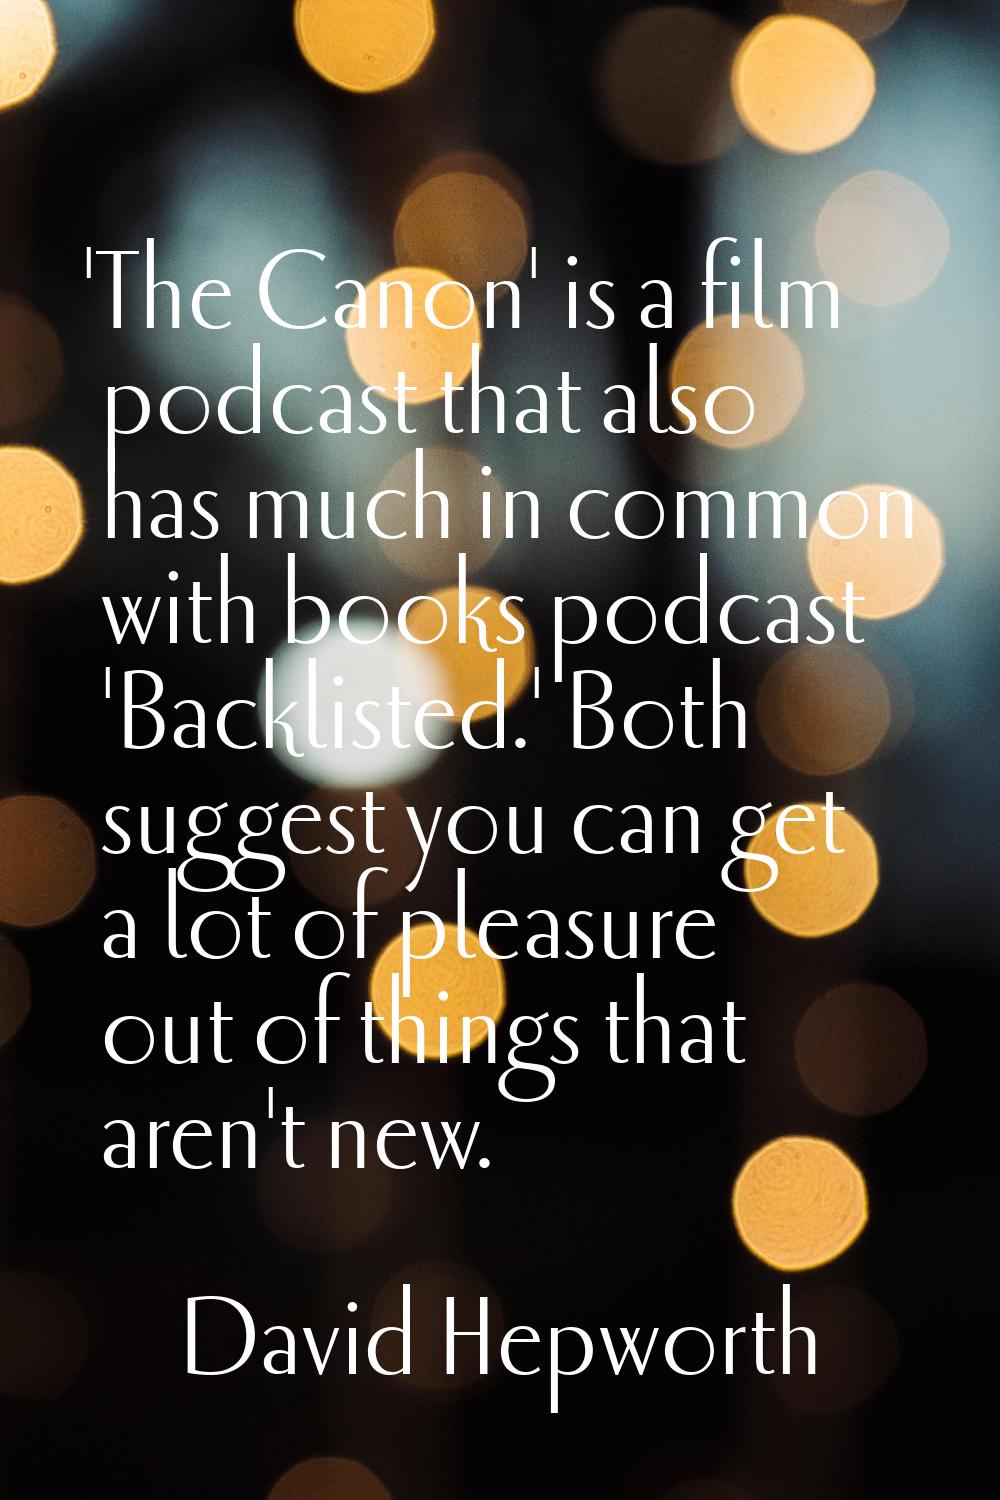 'The Canon' is a film podcast that also has much in common with books podcast 'Backlisted.' Both su